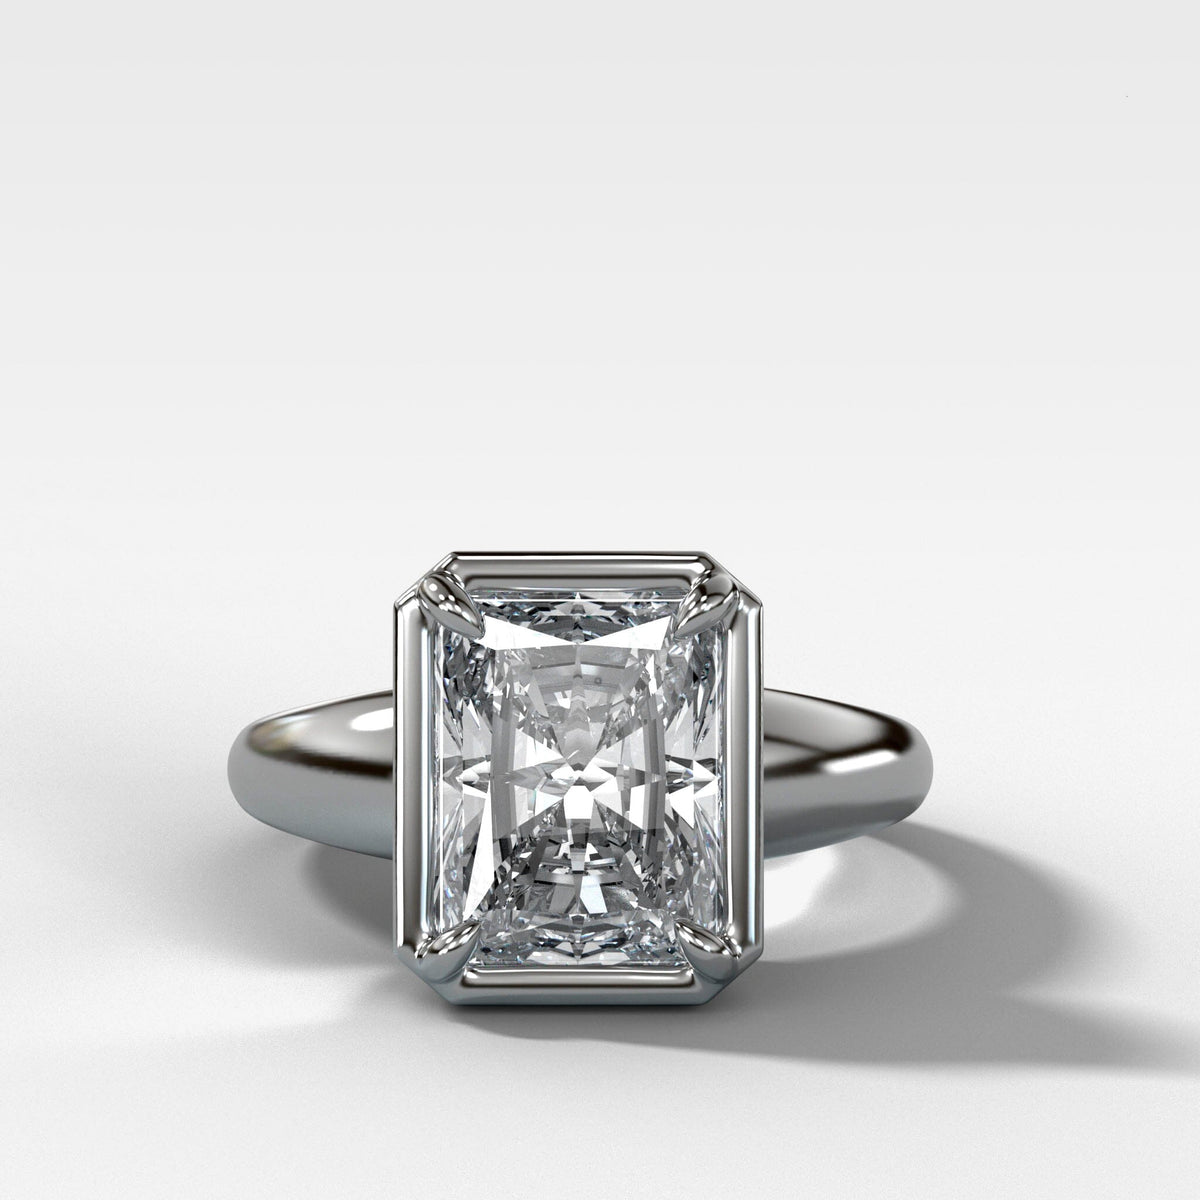 Club Ring Solitaire With an Elongated Radiant Cut Engagement Good Stone Inc 